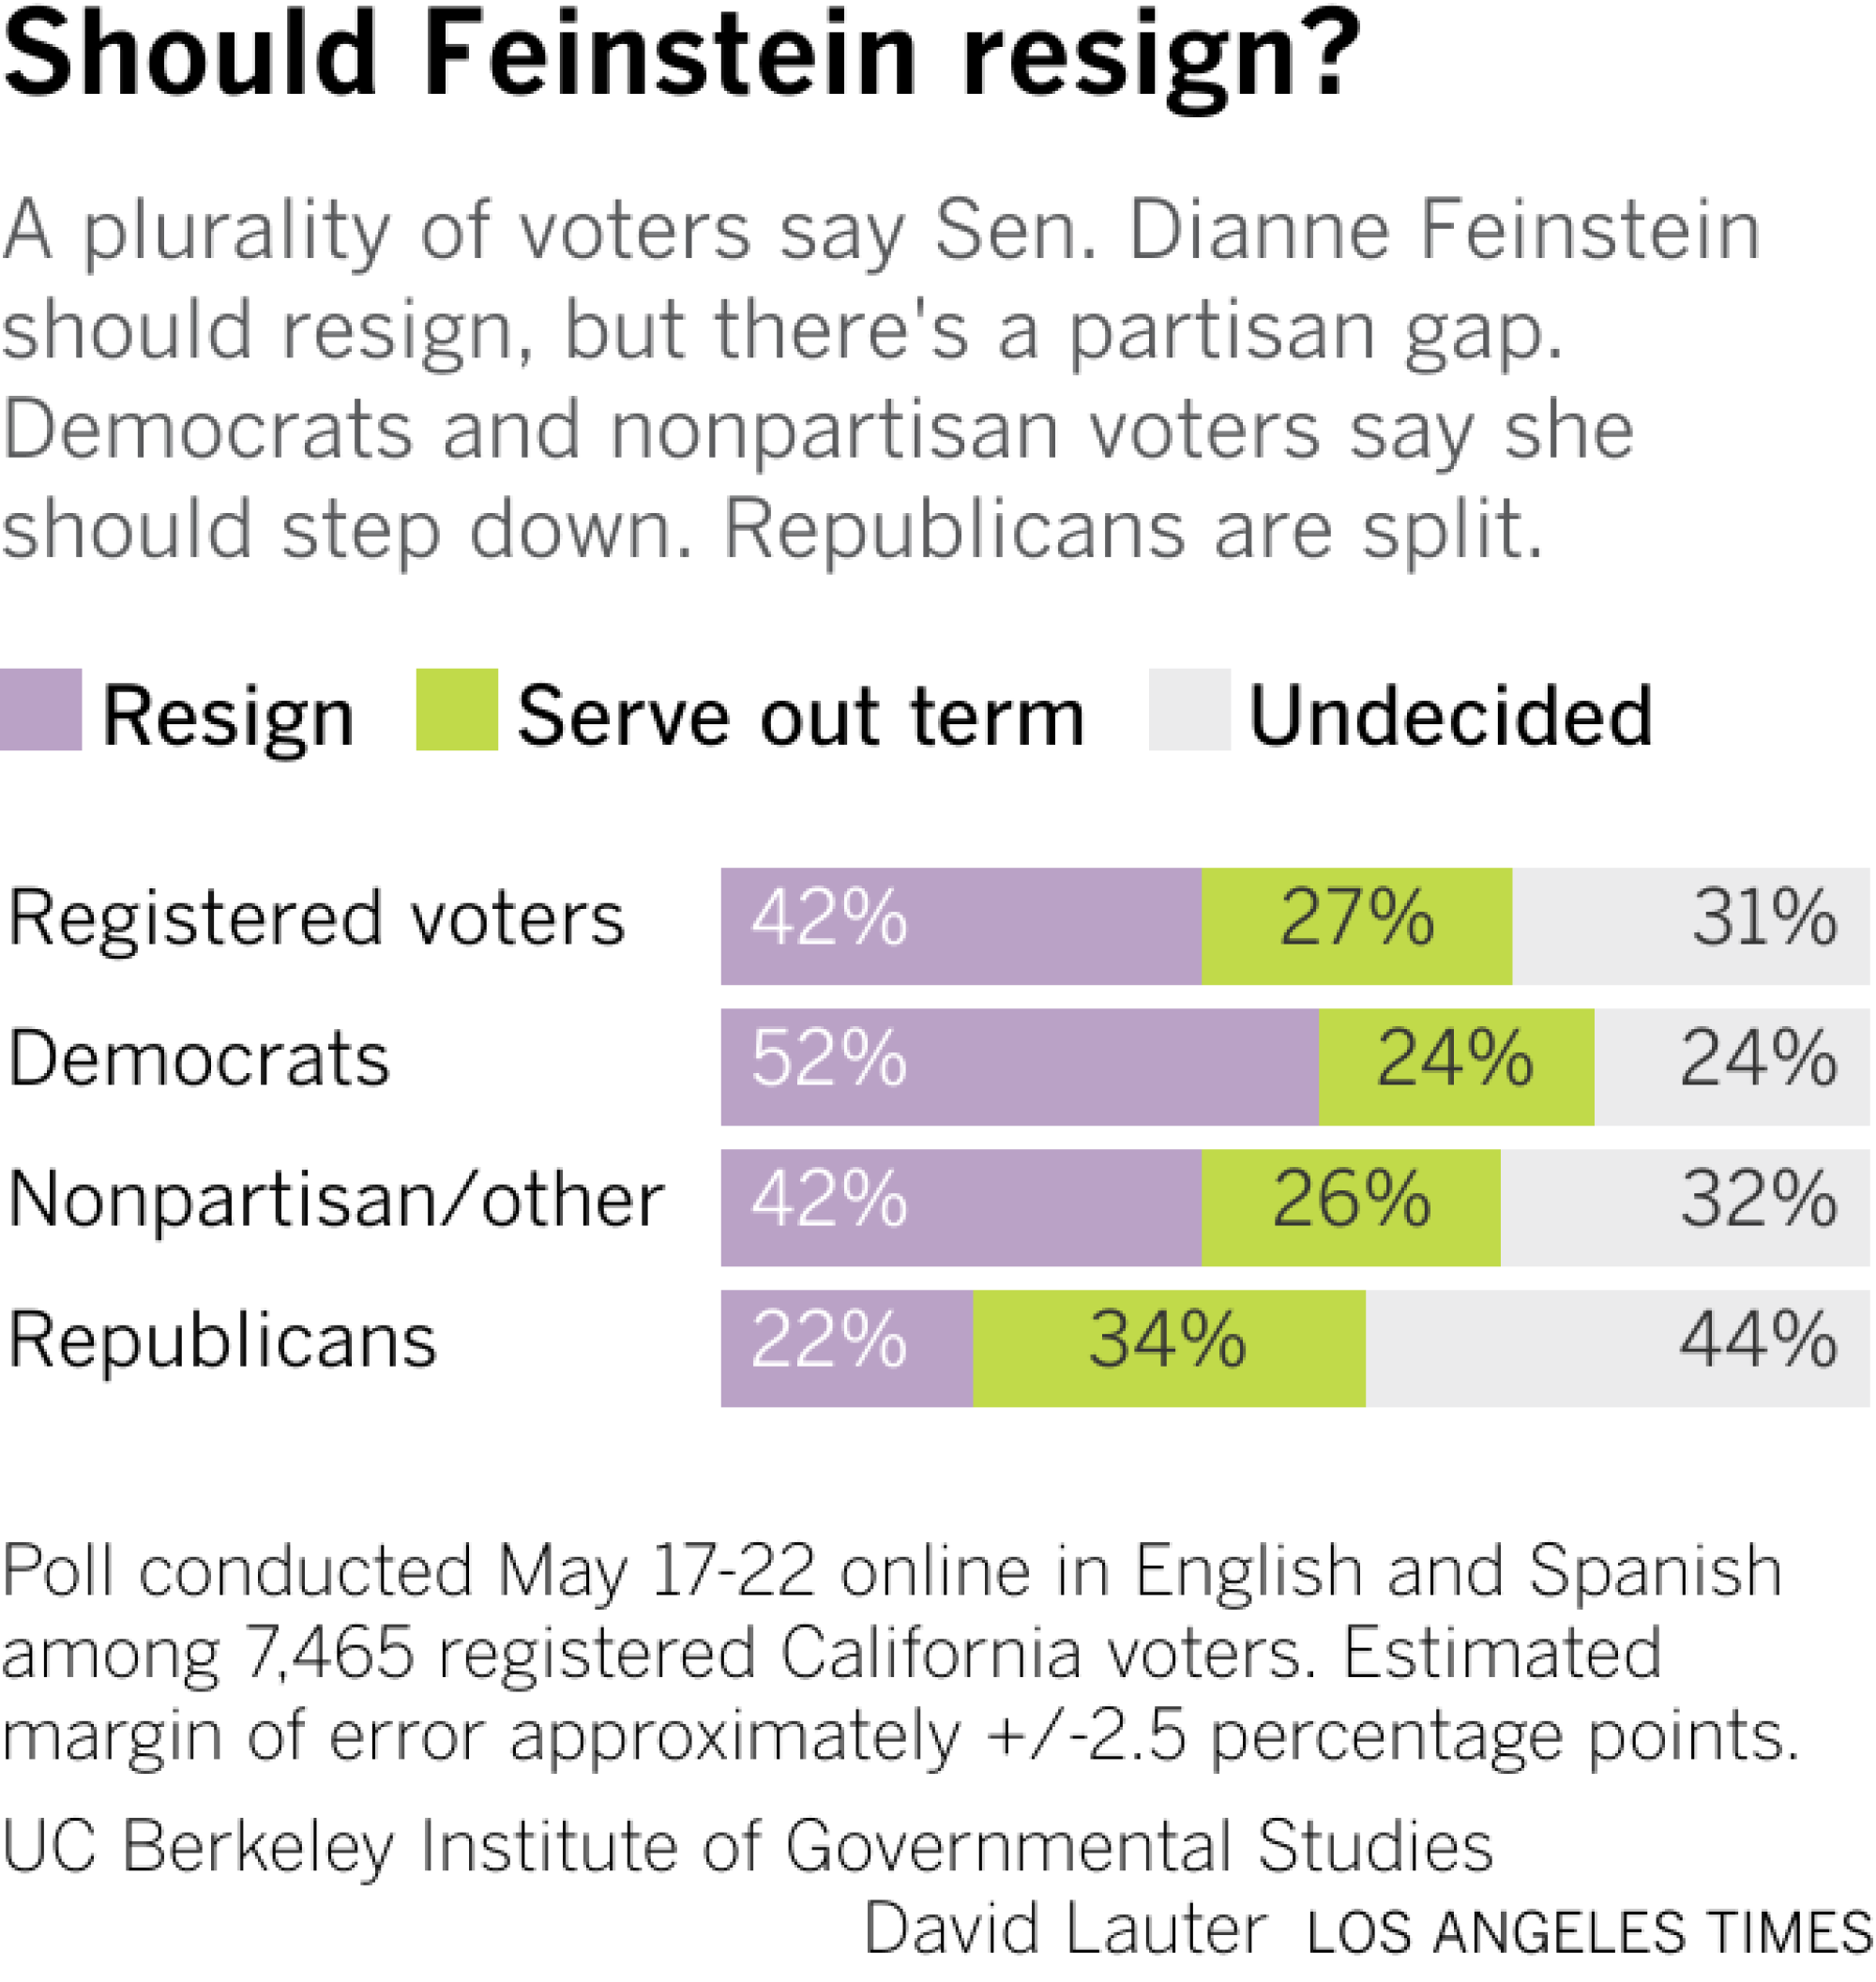 Bar chart shows the share of registered voters, Democrats, Republicans and non-partisans and what they think Feinstein should do.